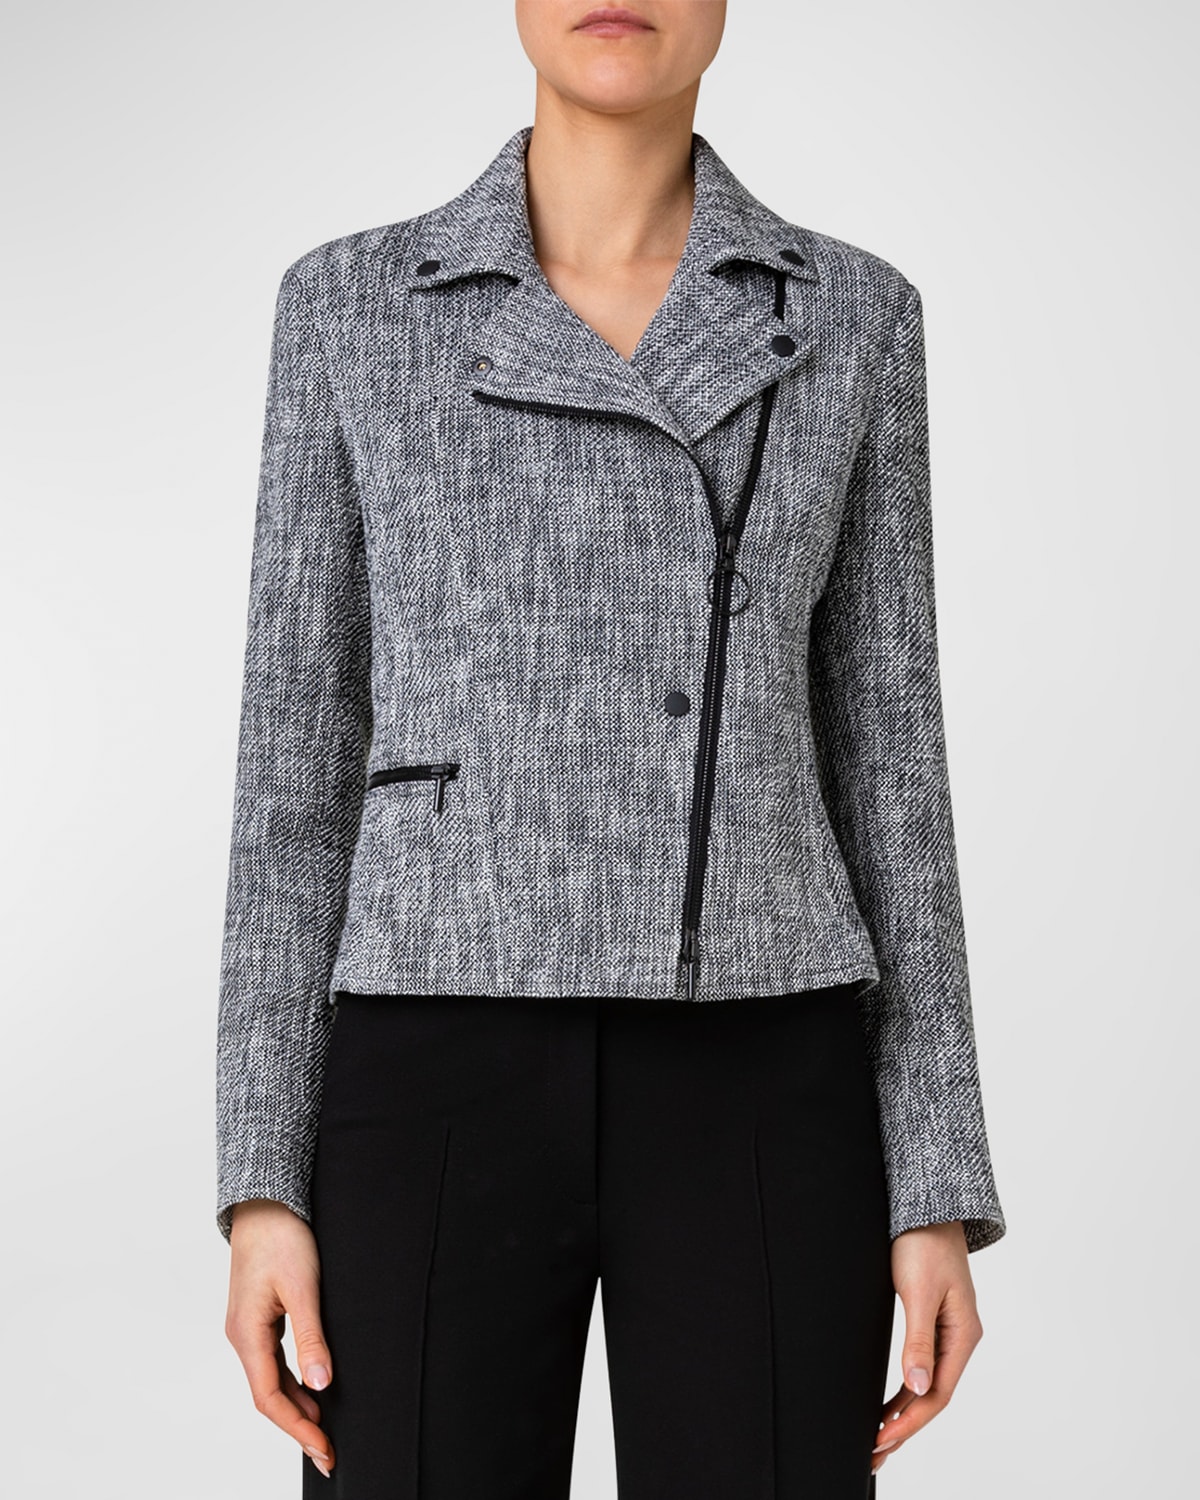 AKRIS PUNTO FITTED TWEED TOP JACKET WITH ASYMMETRIC ZIPPER